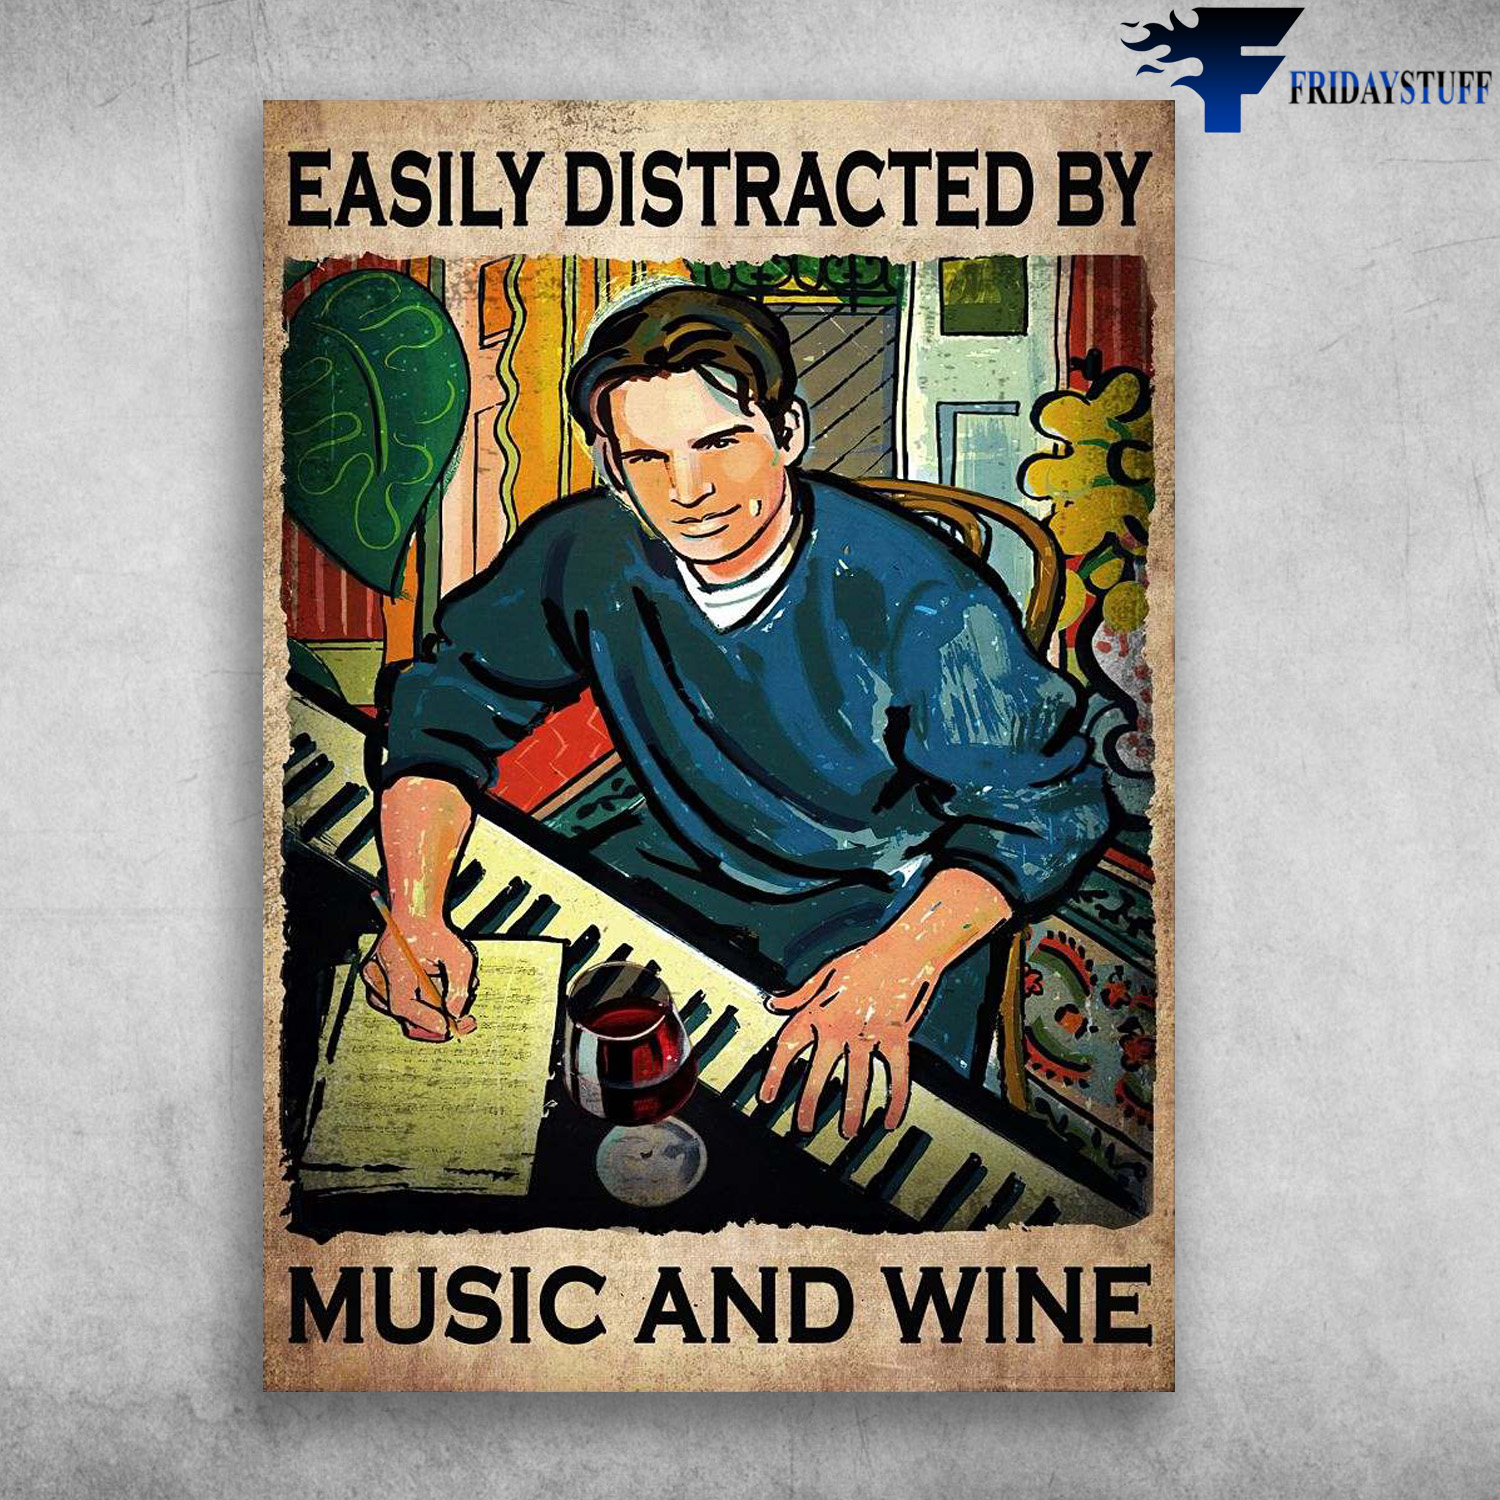 Man Playing Piano, Piano And Wine, Music Lover - Easily Distracted By, Music And Wine Music Sheet